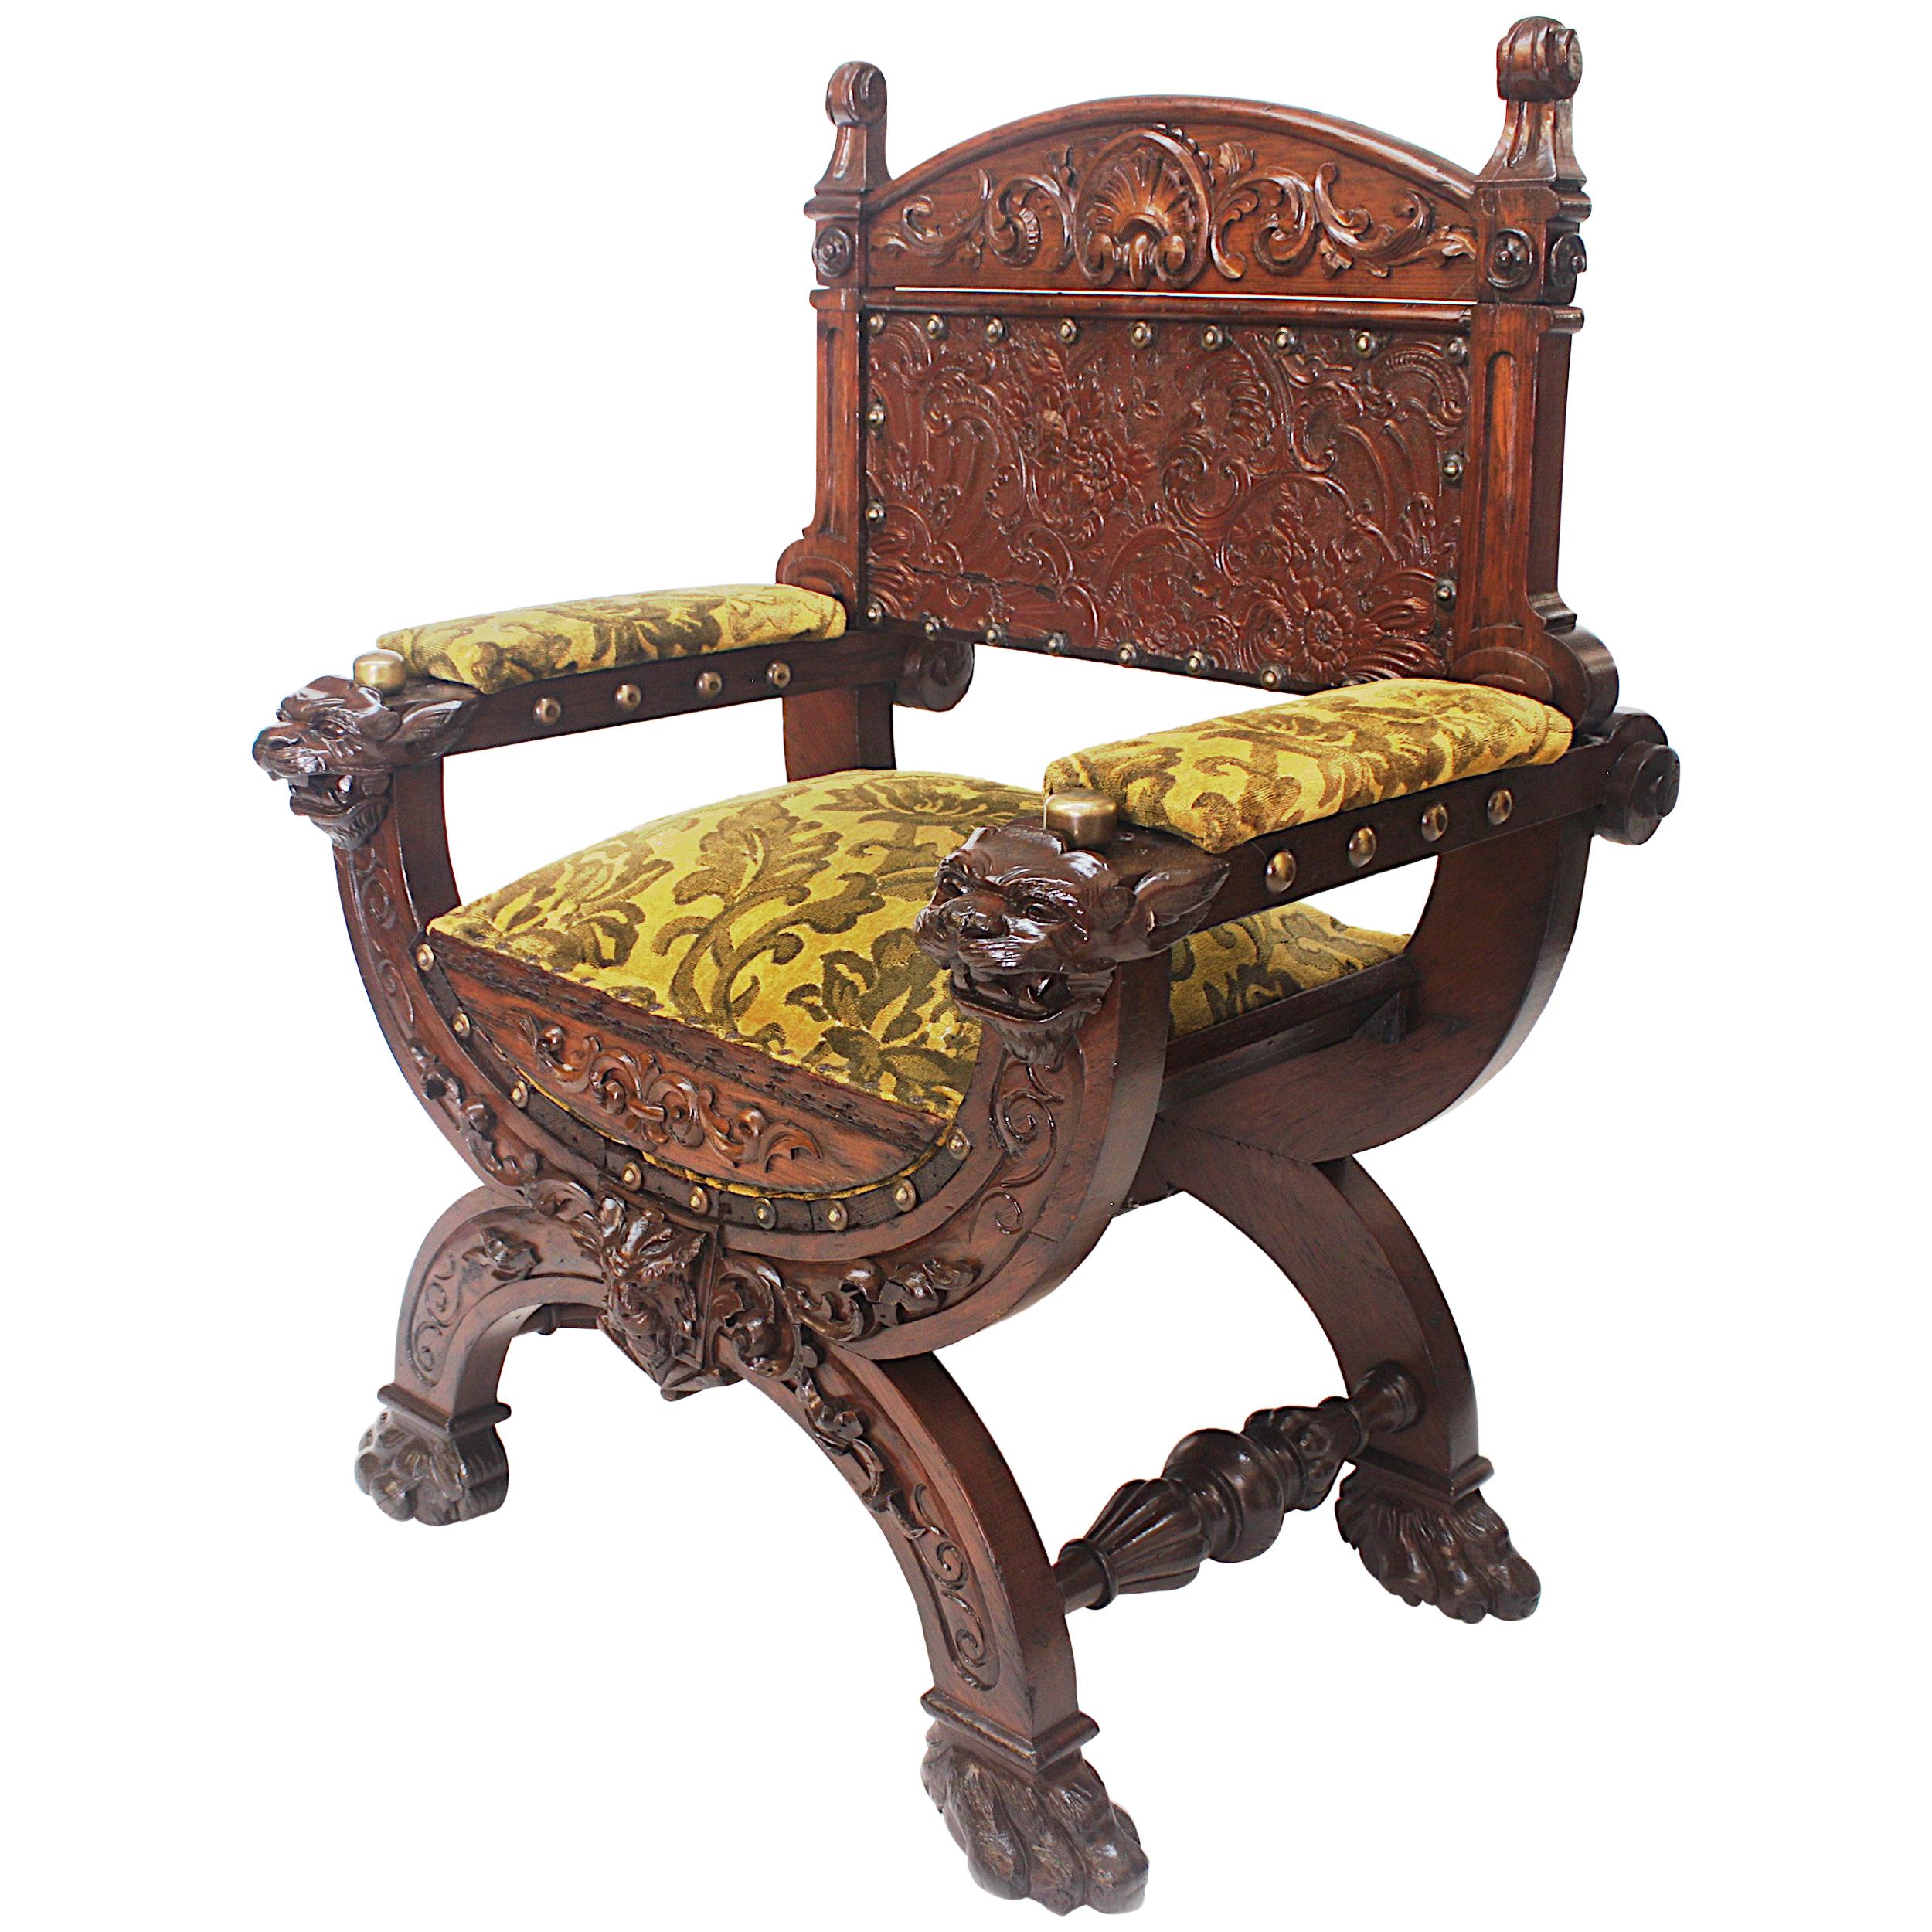 Unusual Early 20th Century Photographer's Posing Chair with Ornate Carving